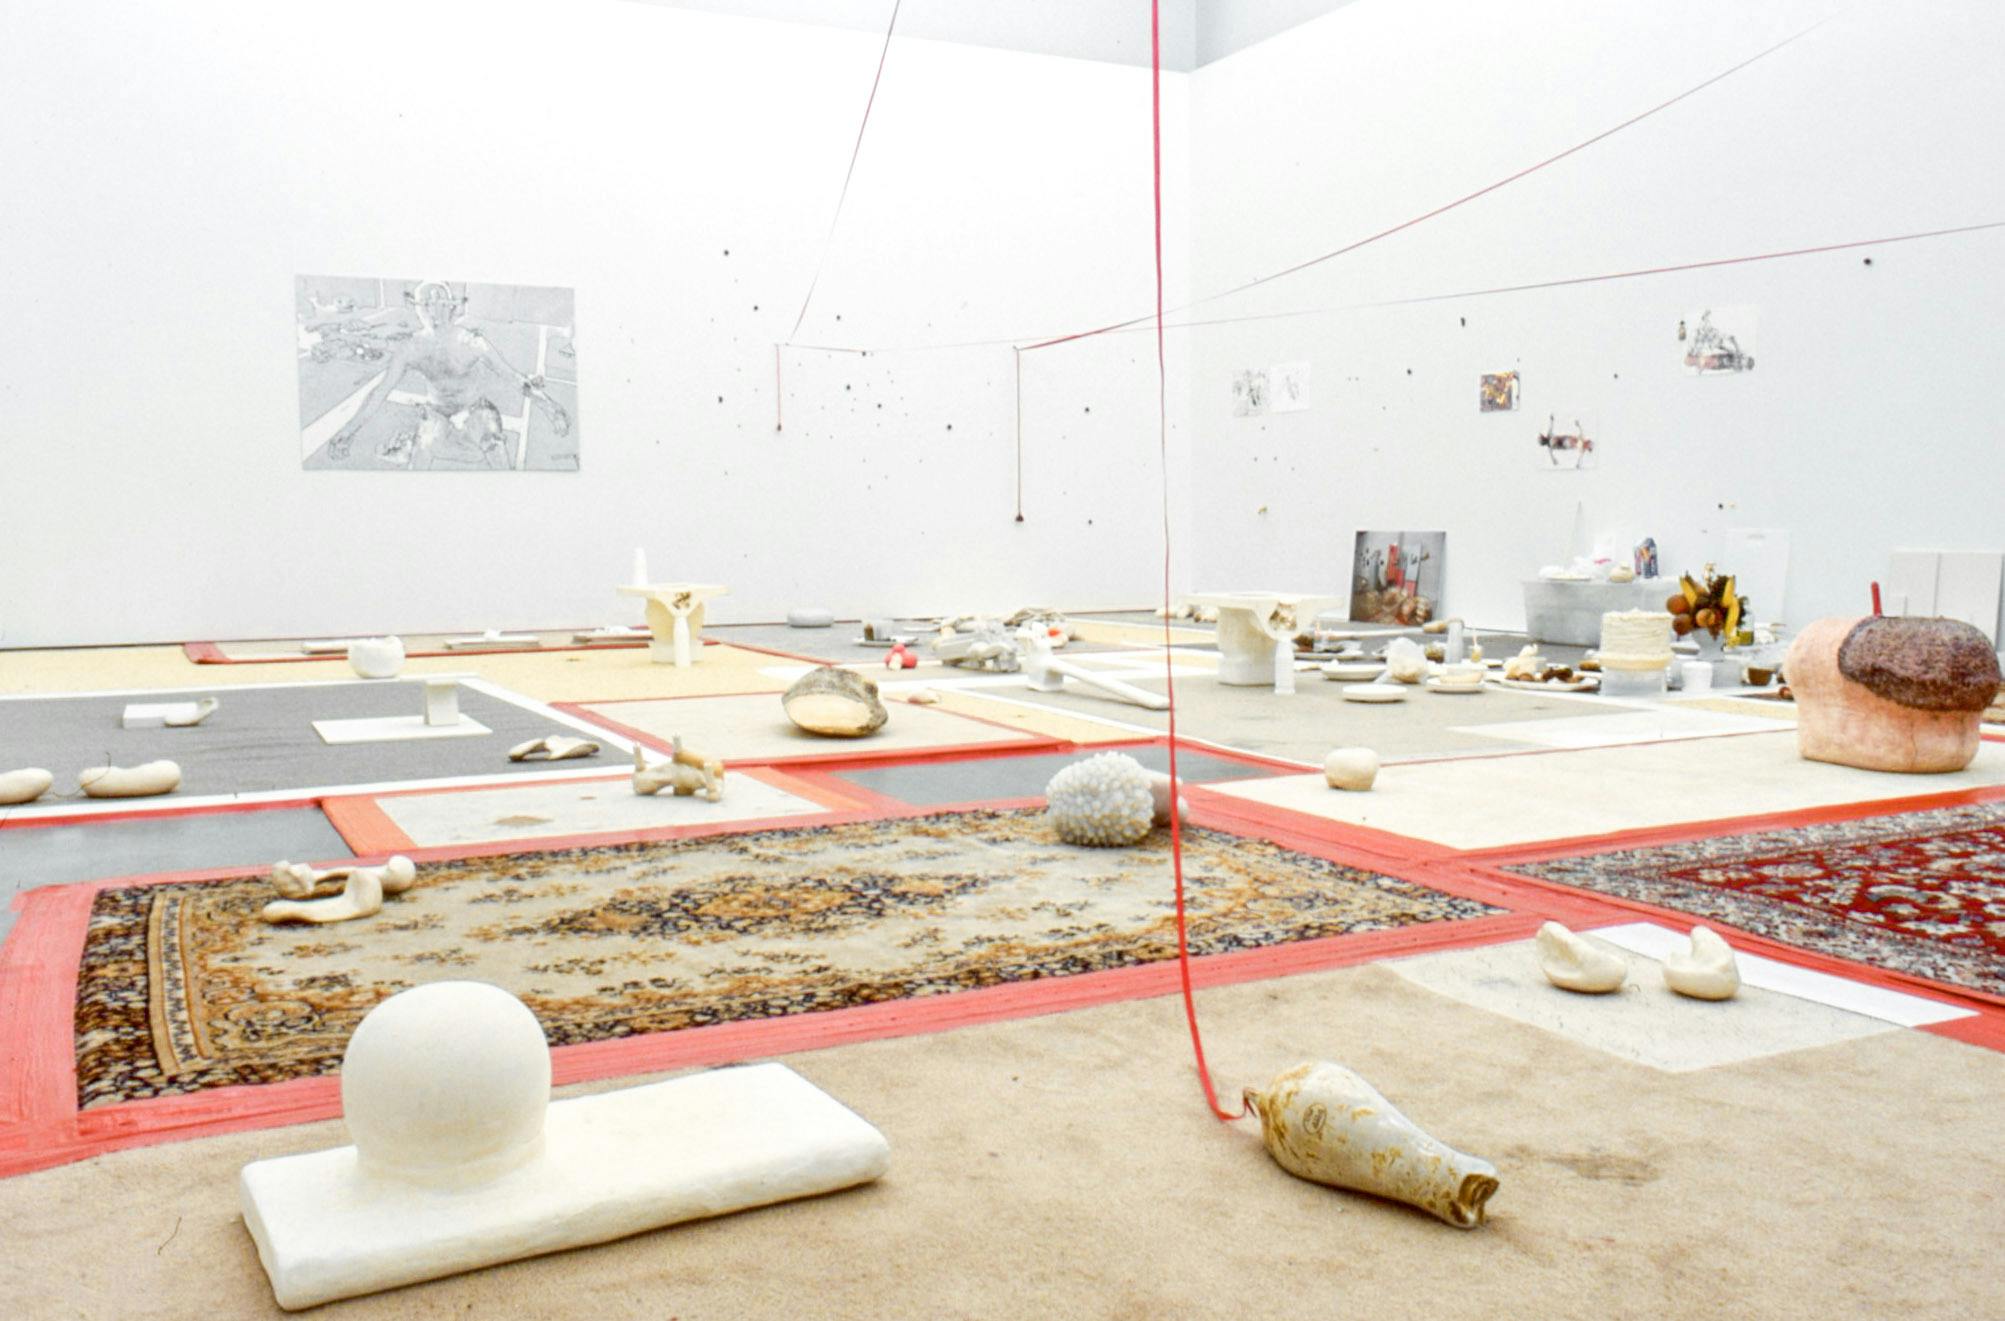 Installation image of artworks in a gallery. A variety of found objects, including shellfish and glass bottles are placed on the floor. The floor is partially covered with the patchwork of various carpets.